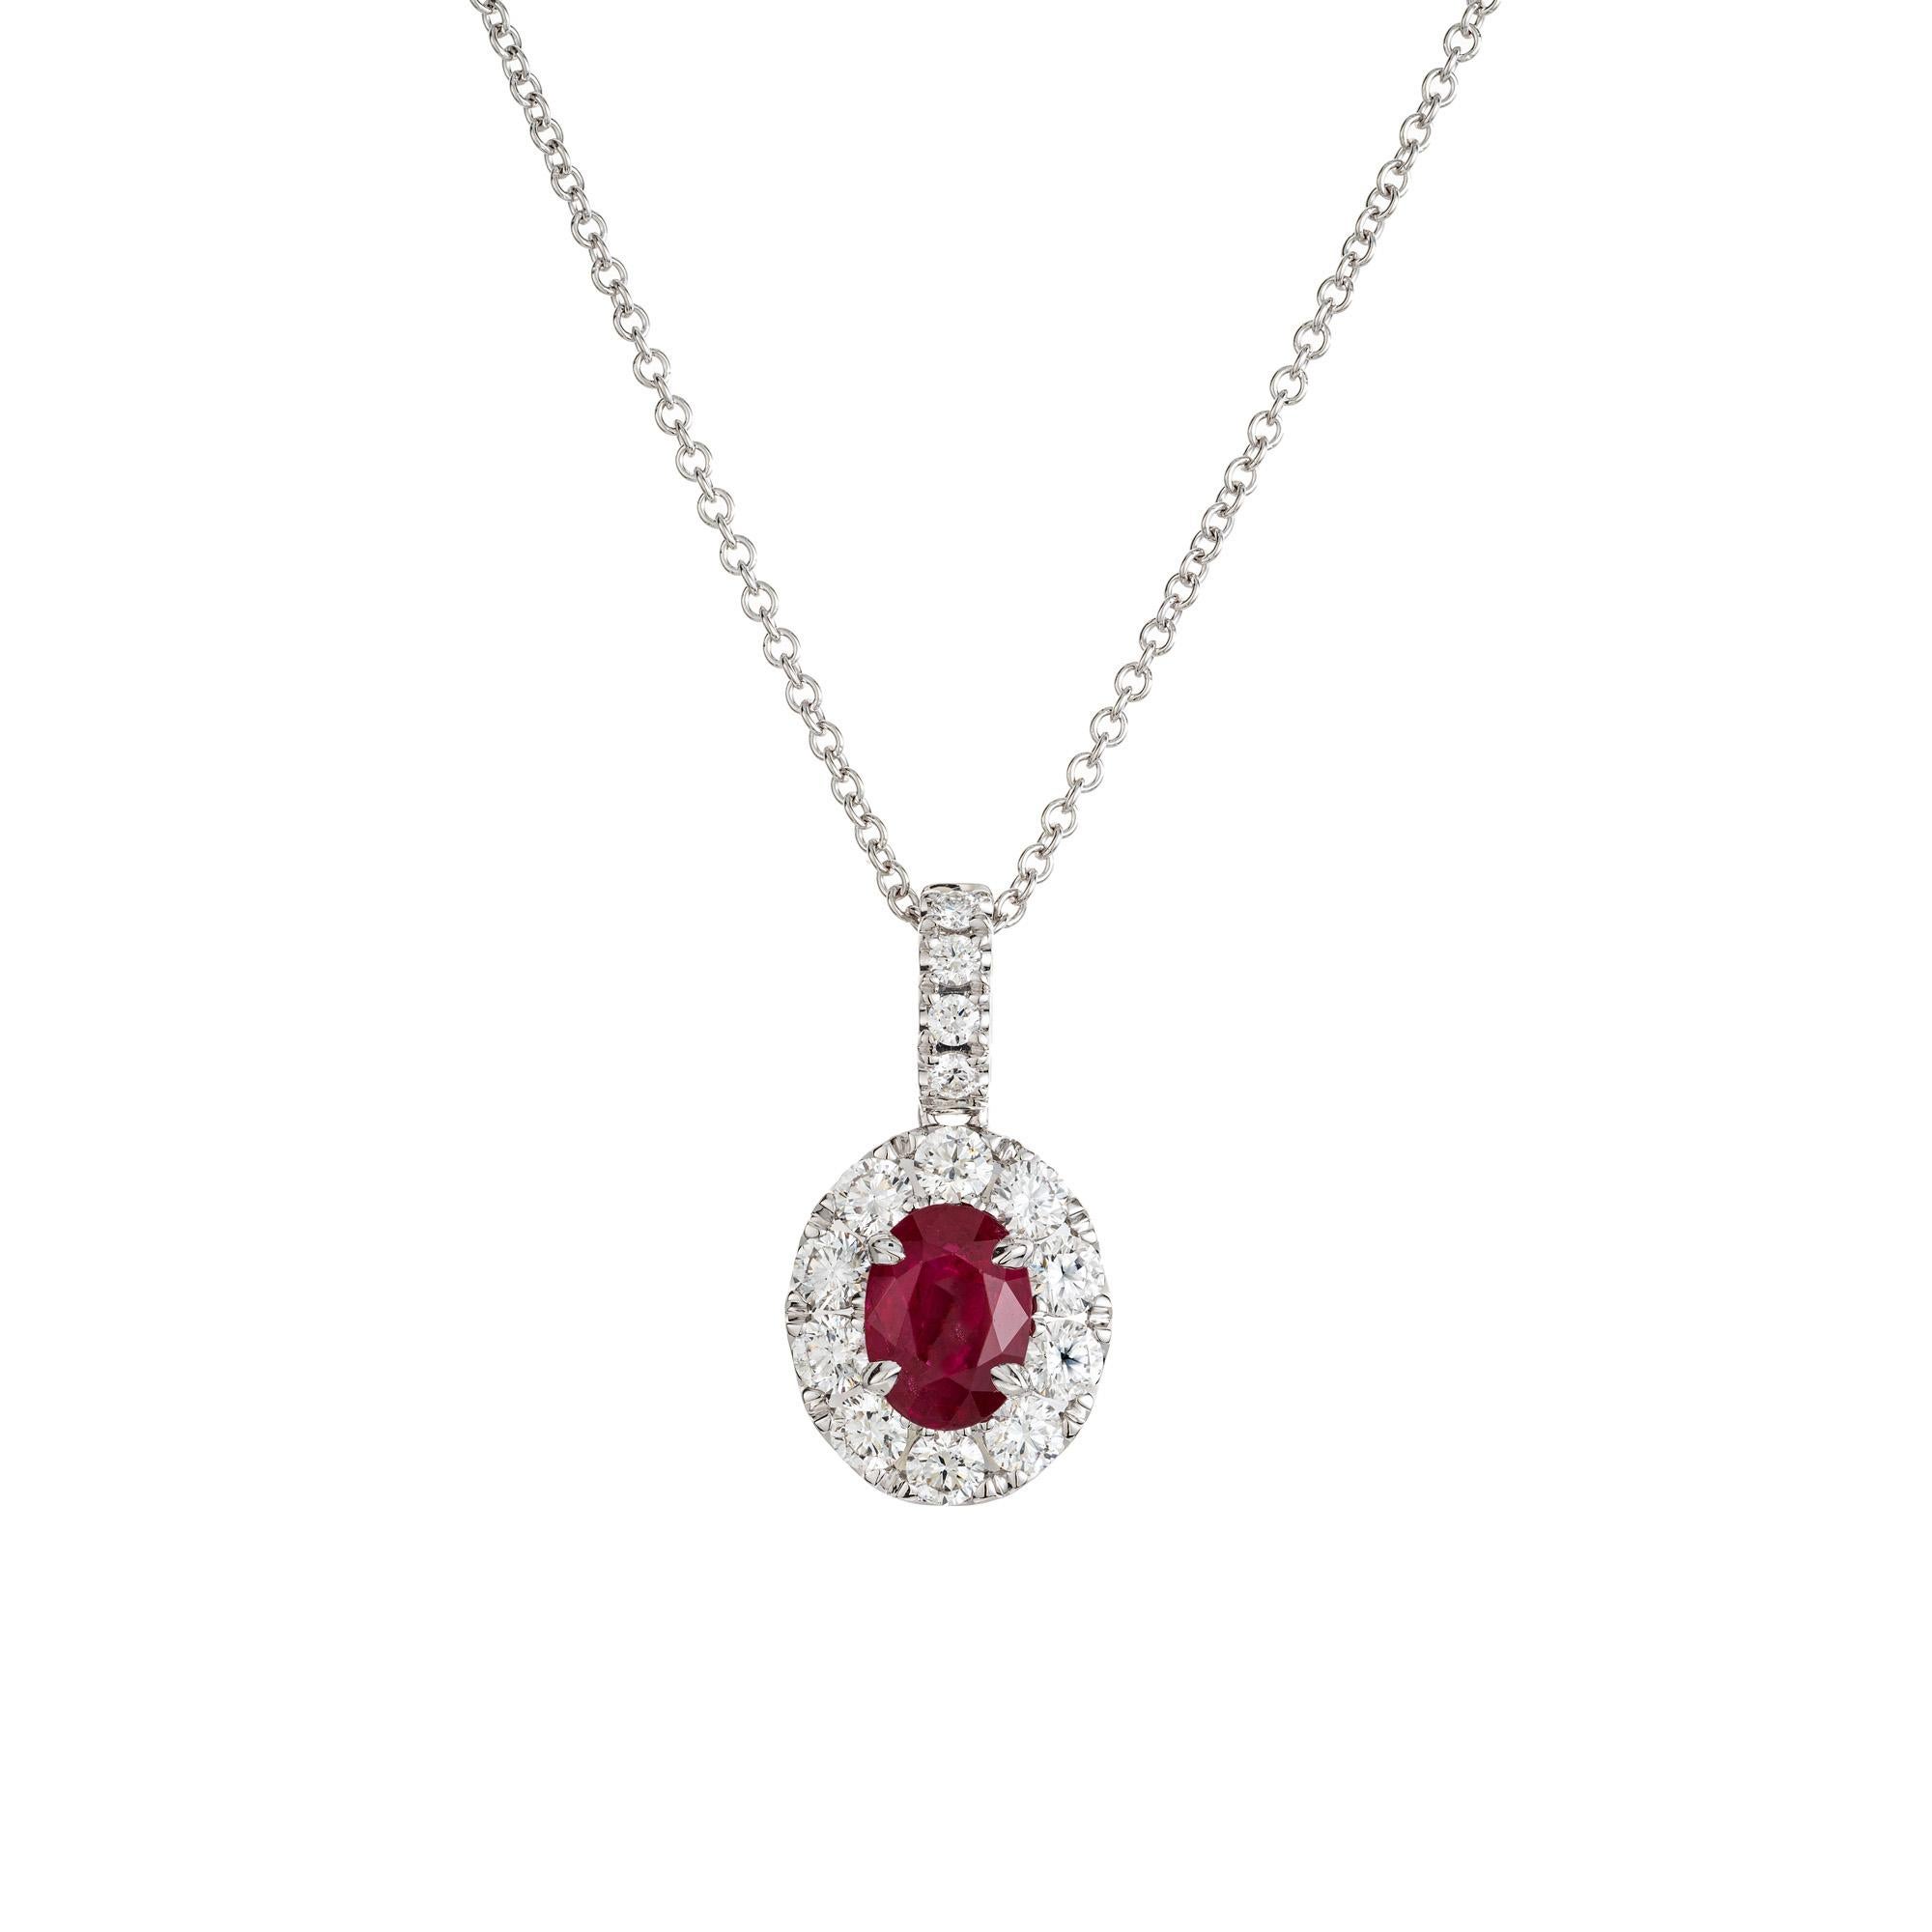 GIA Certified Ruby Diamond White Gold Pendant Necklace. This pendant necklace is meticulously in 18k white gold with a GIA certified 1.32 oval ruby center stone with a halo of round brilliant cut diamonds and accented with diamonds along the bail.